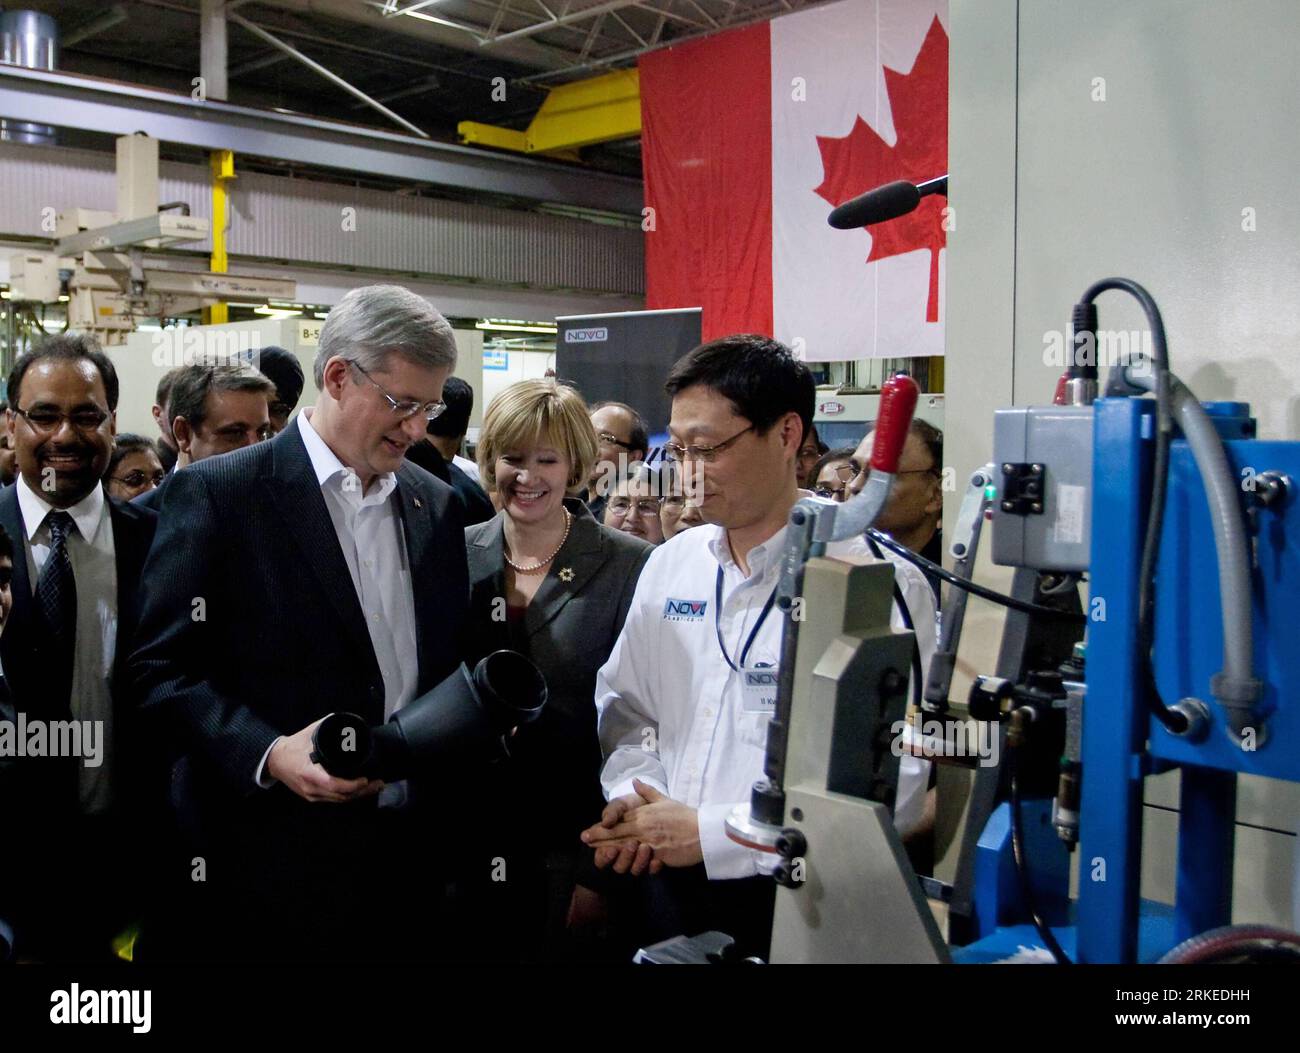 Bildnummer: 55241000  Datum: 06.04.2011  Copyright: imago/Xinhua (110406) -- TORONTO, April 6, 2011 (Xinhua) -- Canadian Prime Minister and Conservative Party leader Stephen Harper (L Front) visits a workshop of NOVO Plastics Inc. at a campaign stop in Markham, Ontario, Canada, April 6, 2011. All parties in Canada are competing for the 41st federal election after the dissolution of the 40th parliament on March 26, 2011. (Xinhua/TonyxKing) (zw) CANADA-ELECTION-CAMPAIGN-HARPER PUBLICATIONxNOTxINxCHN Politik People Wahlkampf kbdig xub 2011 quer premiumd     55241000 Date 06 04 2011 Copyright Imag Stock Photo